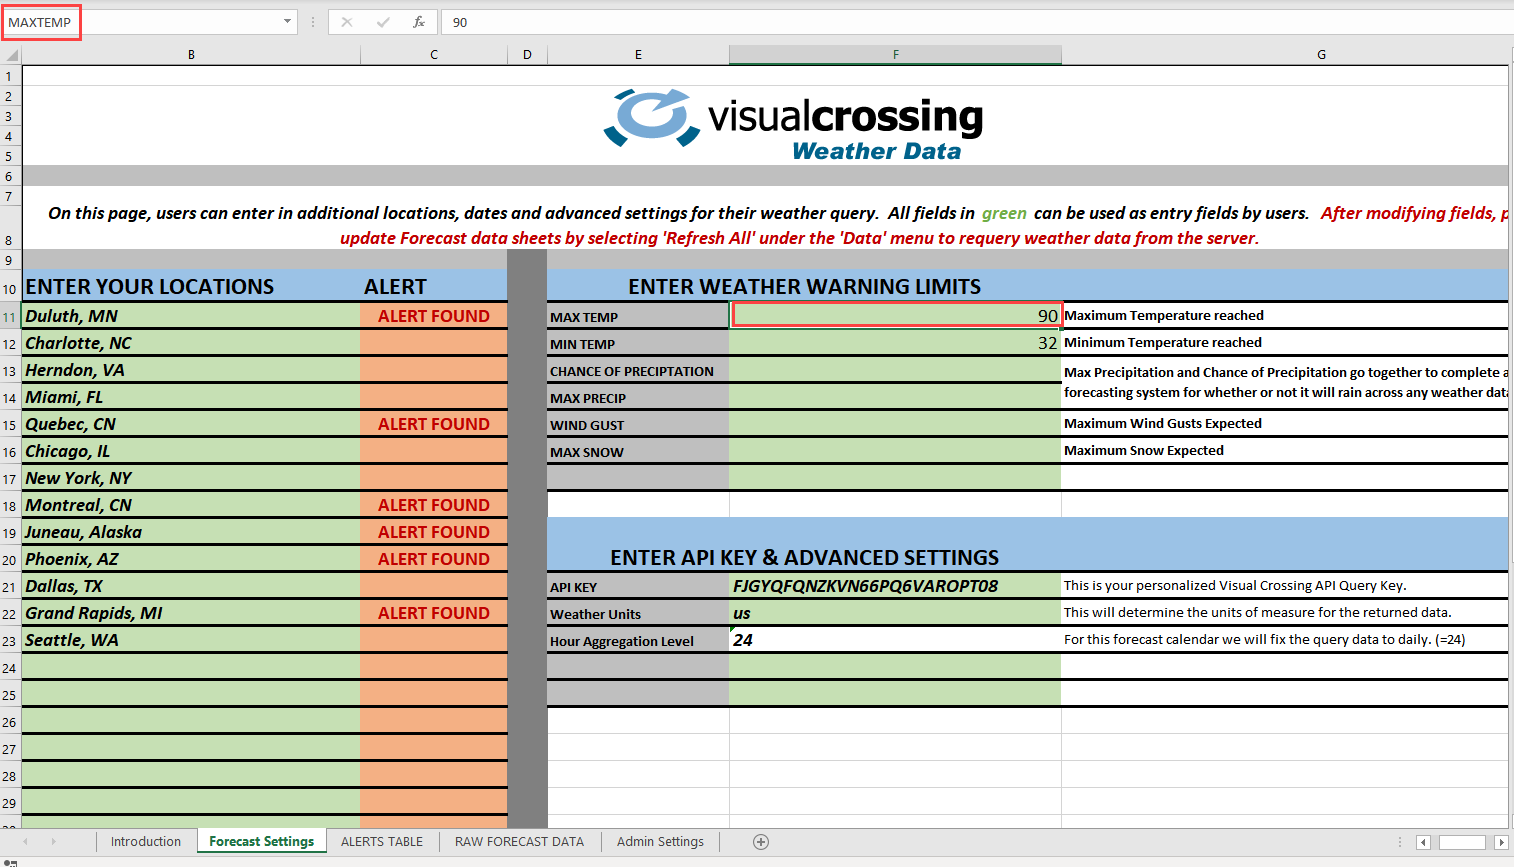 User settable cell values for weather alerts